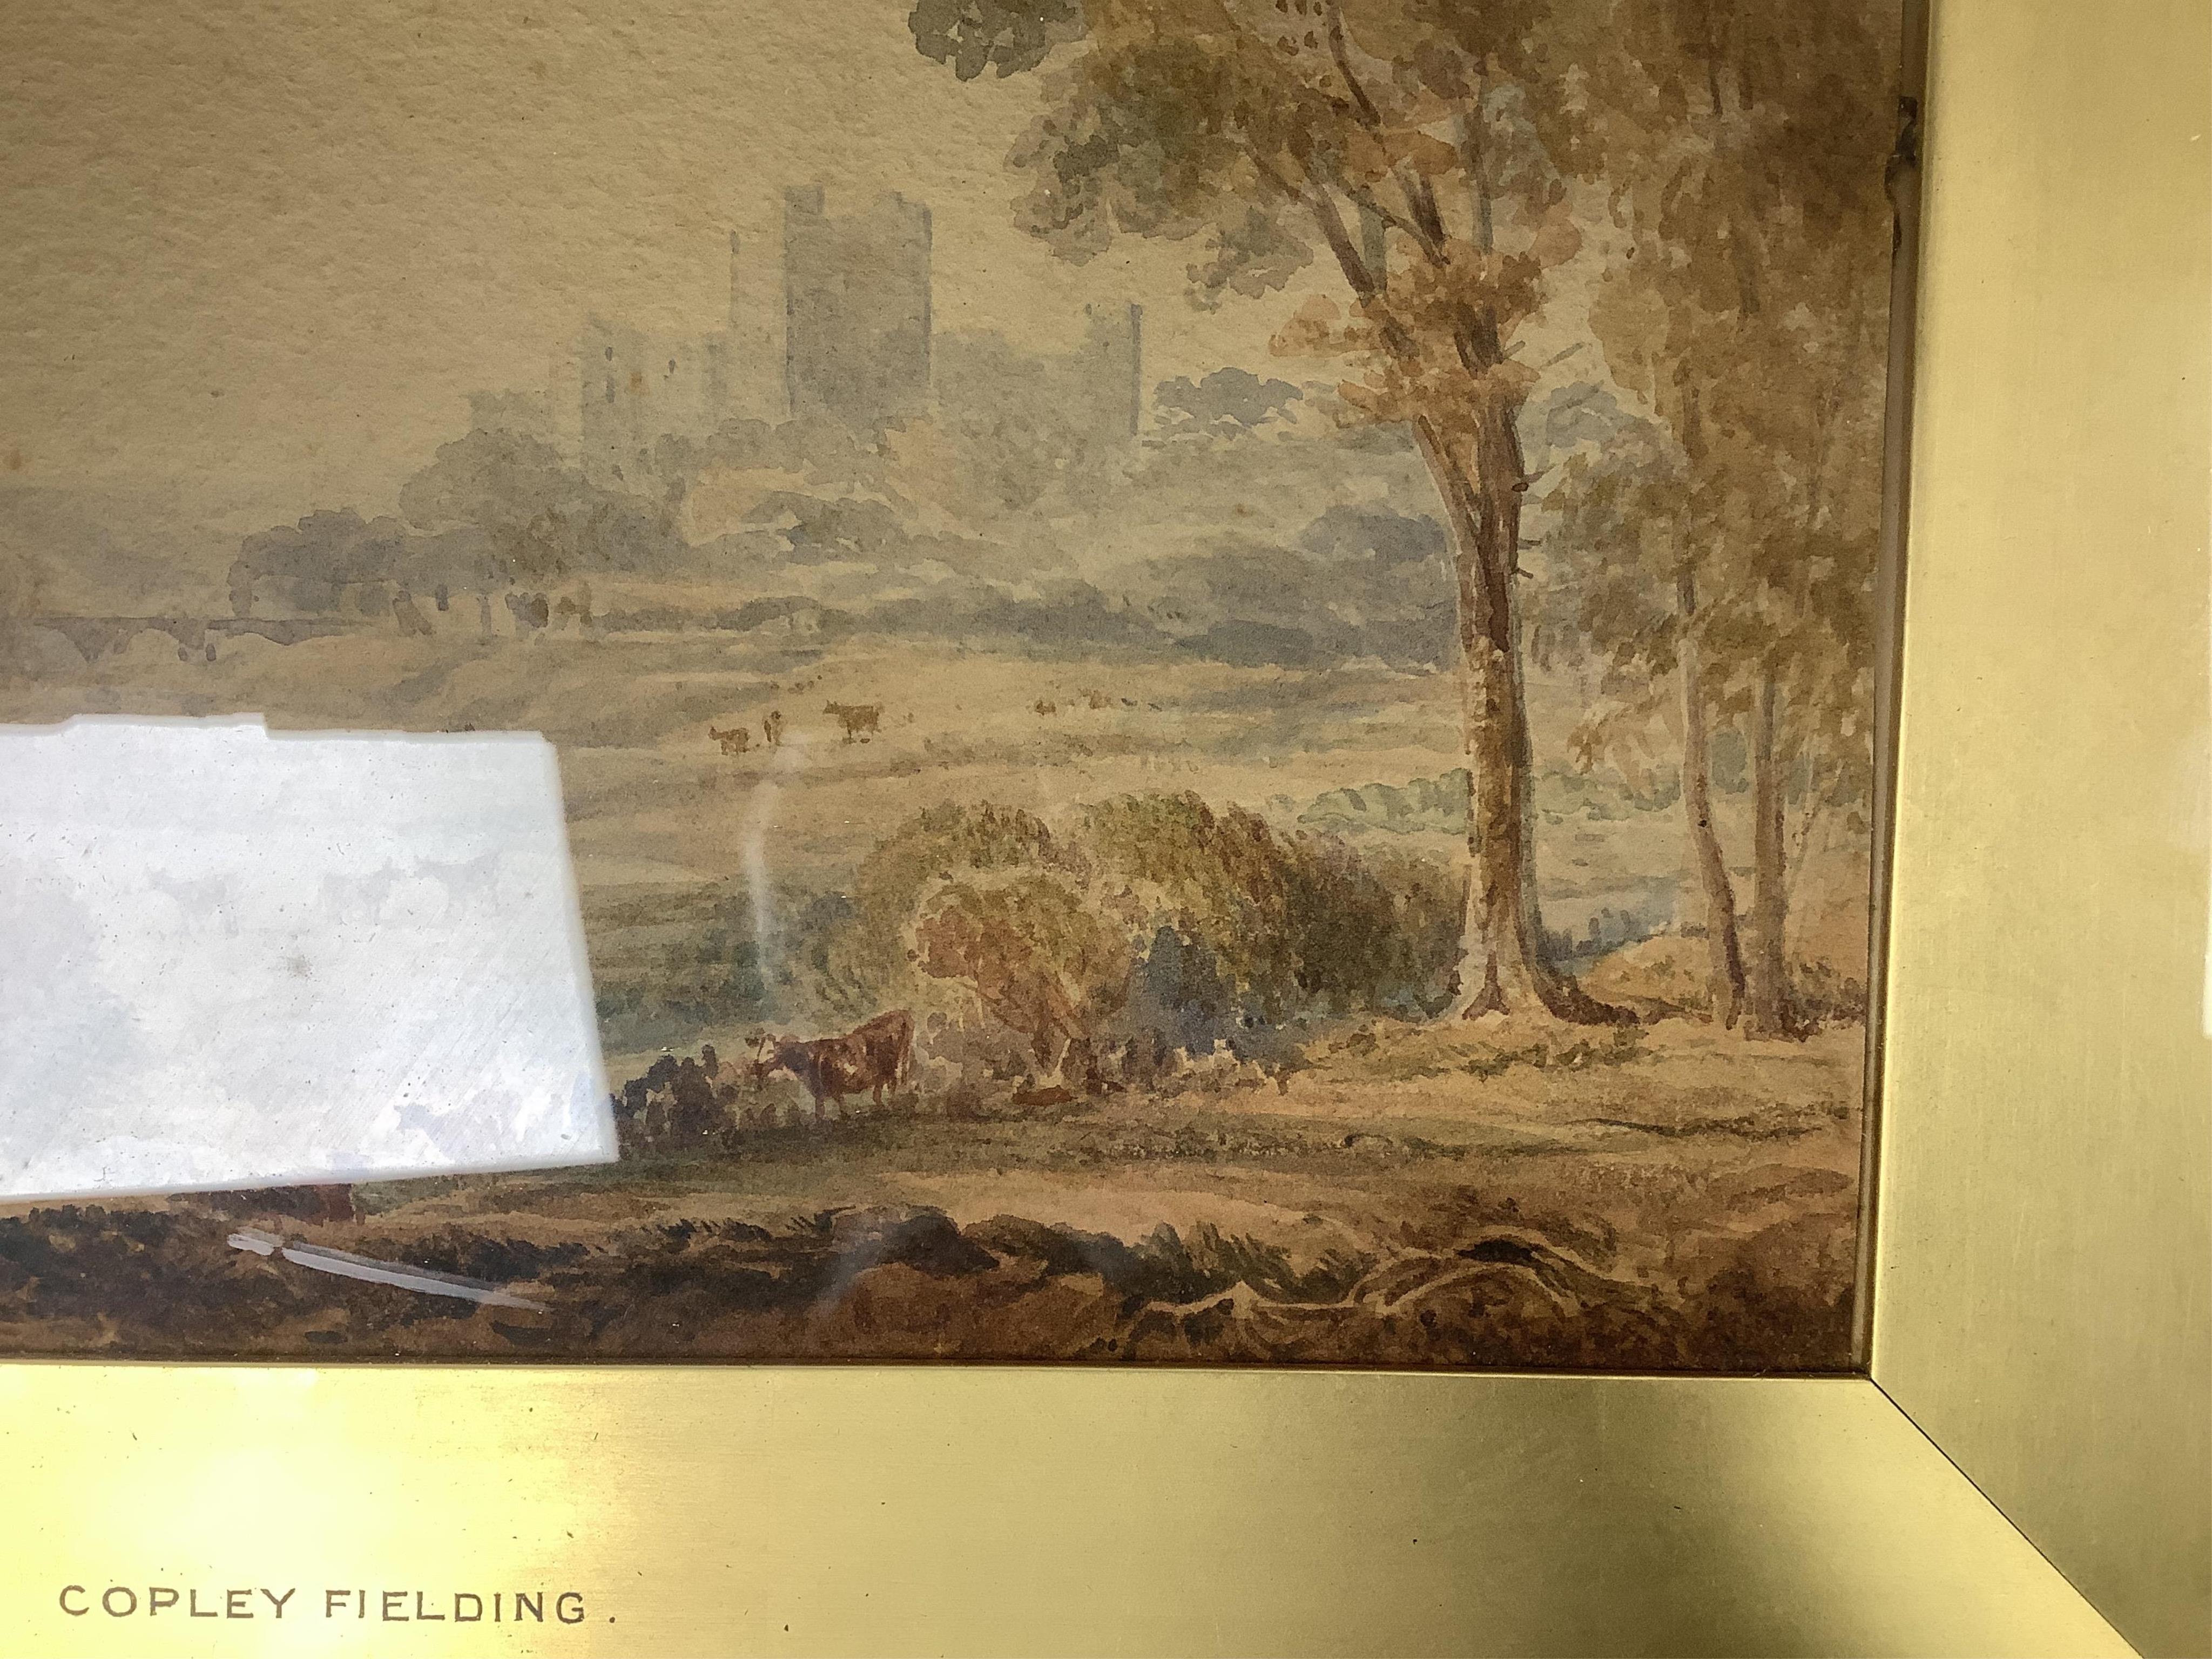 Copley Fielding (1787-1855), watercolour, Pastoral landscape with cattle, signed and dated 1809, 19 x 29cm, gilt framed. Condition - fair